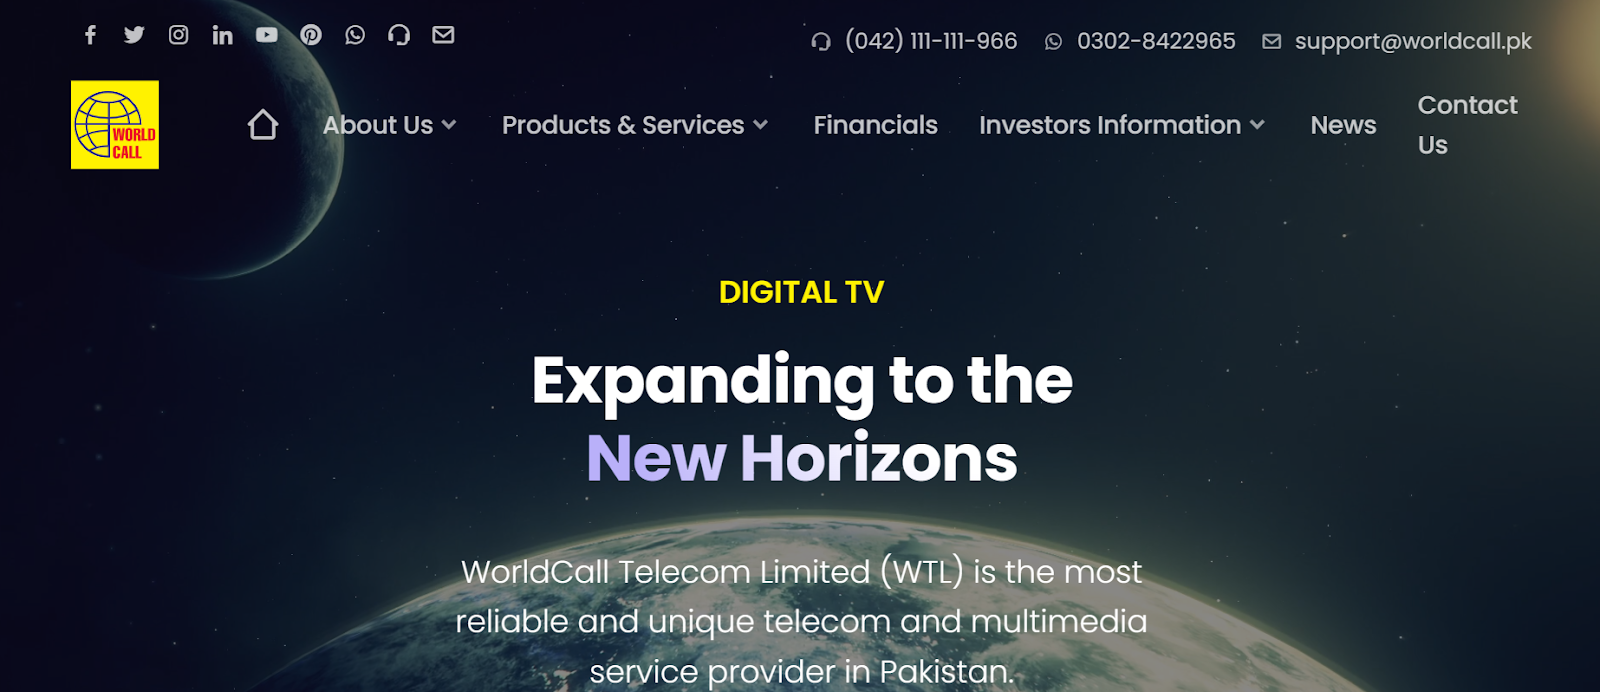 Worldcall Telecom Limited website snapshot highlighting the services it provides.